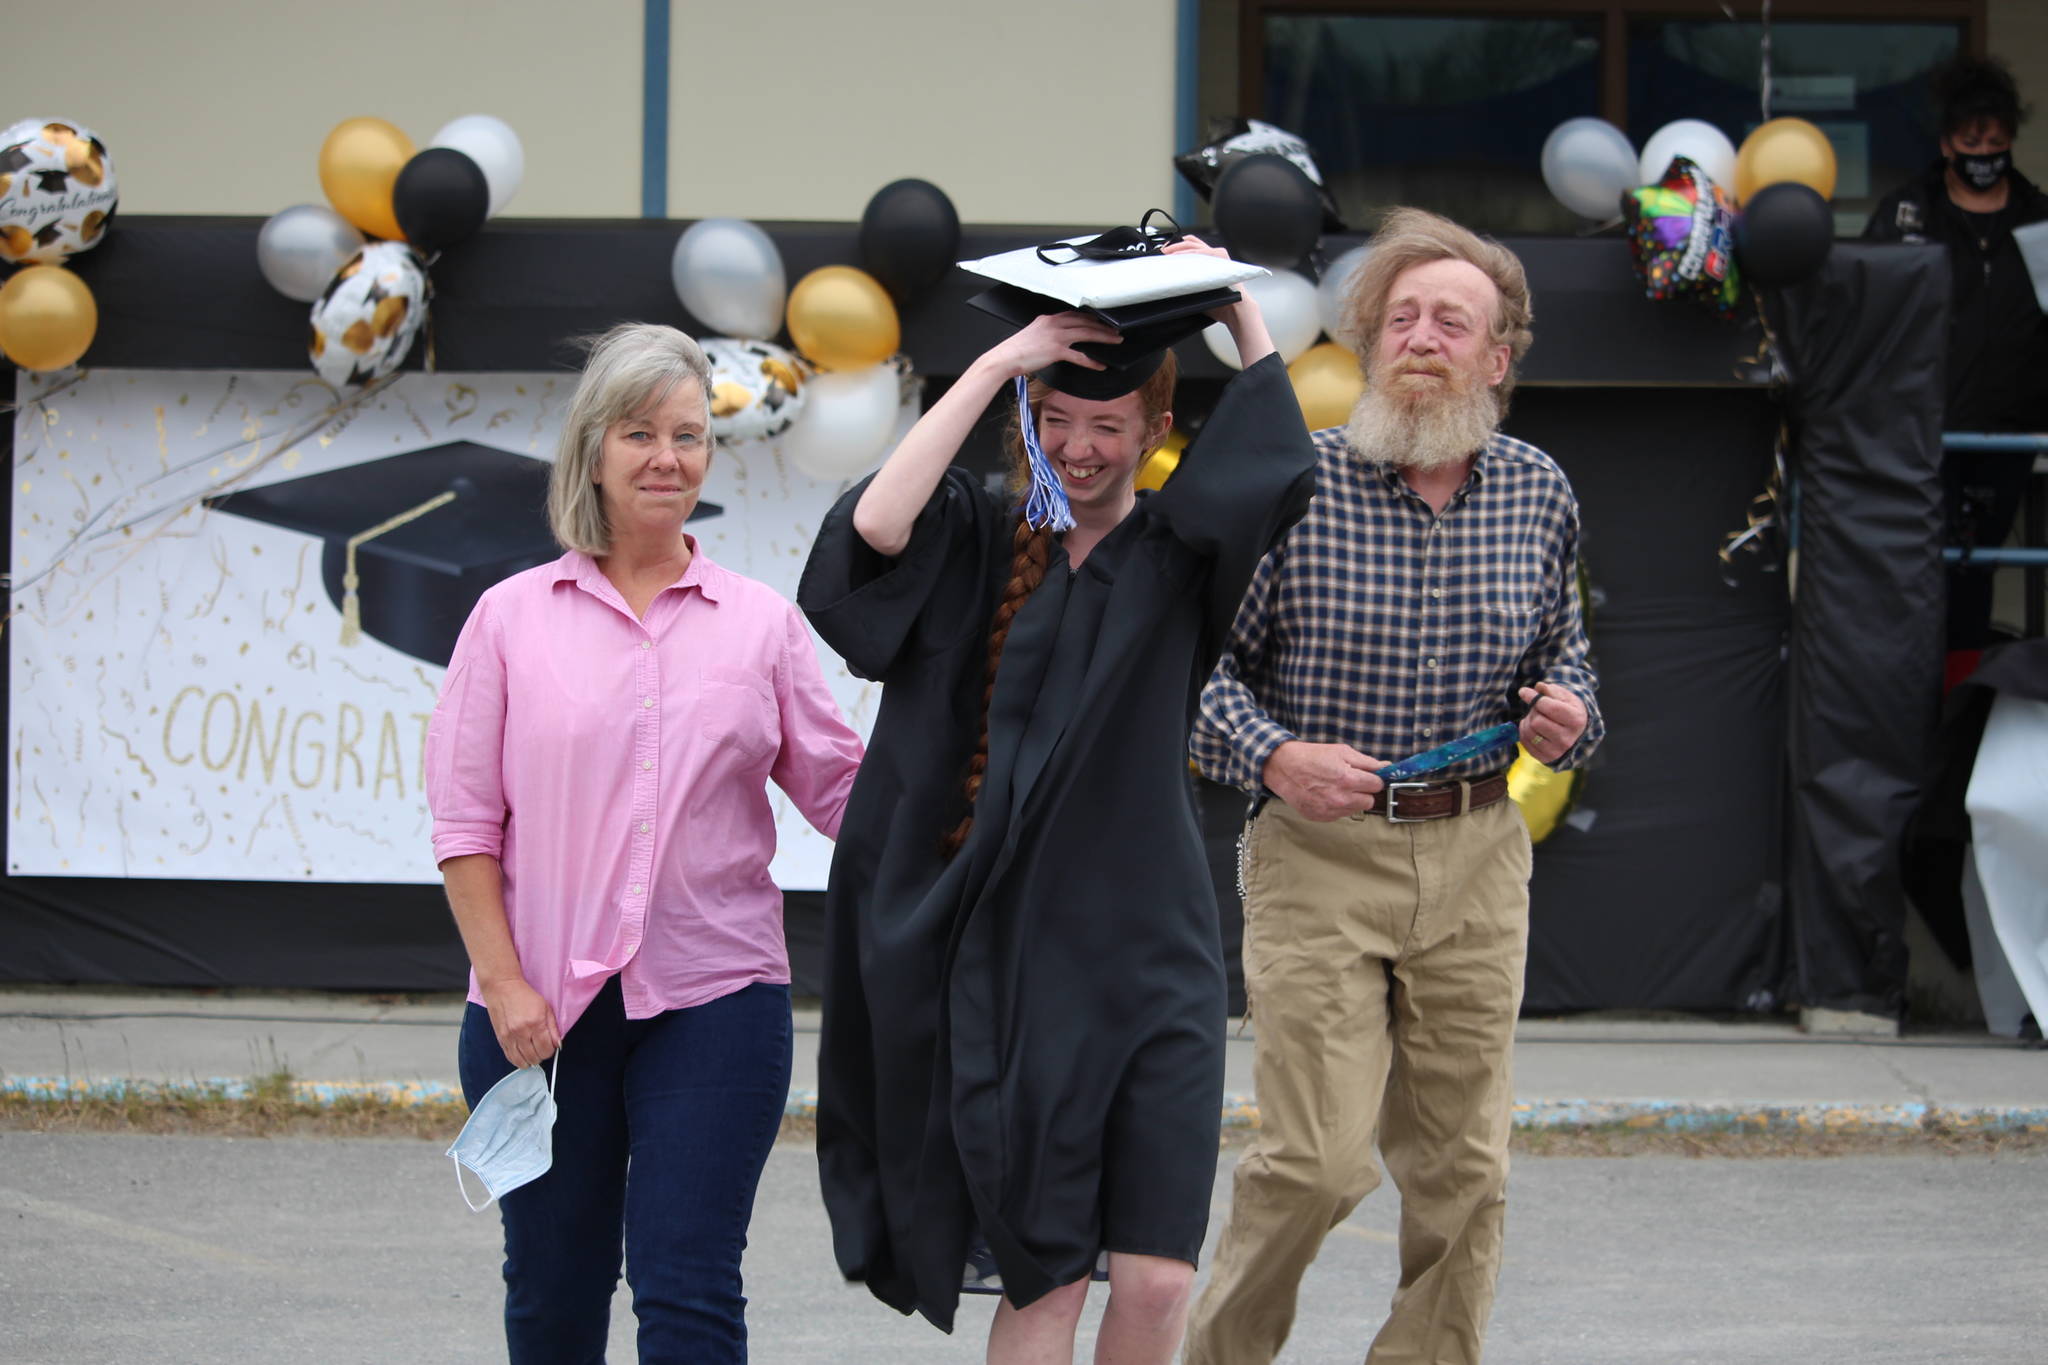 Graduate Virginia Orth walks back to her car with her parents, April and David Orth, after receiving her diploma during the Connections Homeschool Class of 2020 graduation at Soldotna Elementary School in Soldotna, Alaska on May 21, 2020. (Photo by Brian Mazurek/Peninsula Clarion)